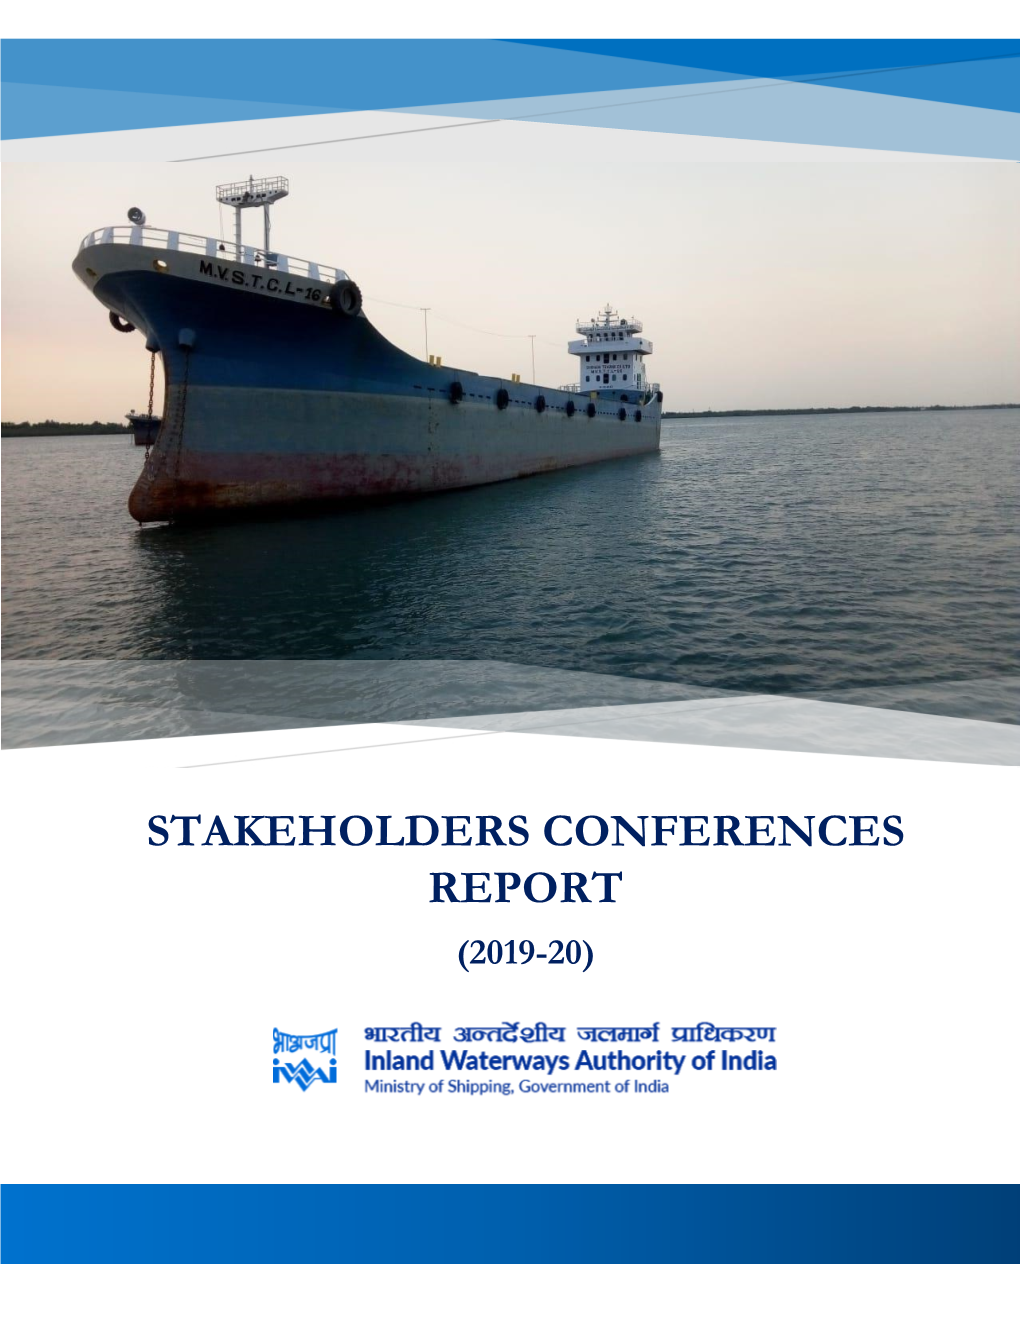 Stakeholders Conferences Report FY 2019-20